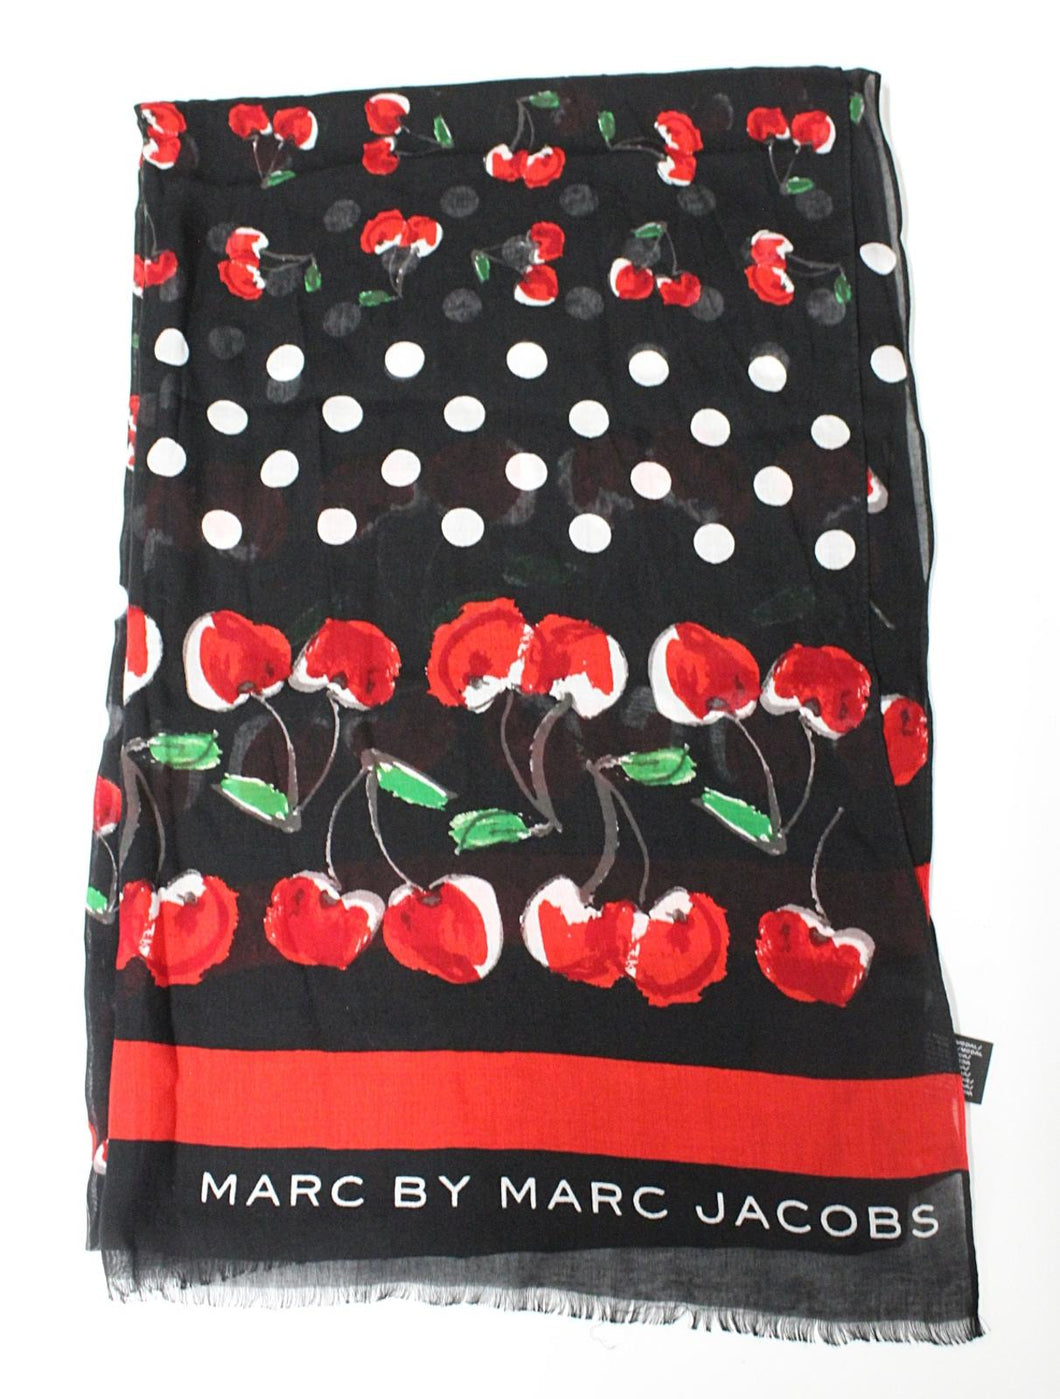 MARC BY MARC JACOBS Ladies Double Cherry Black Multi Modal Silk Blend Scarf OS